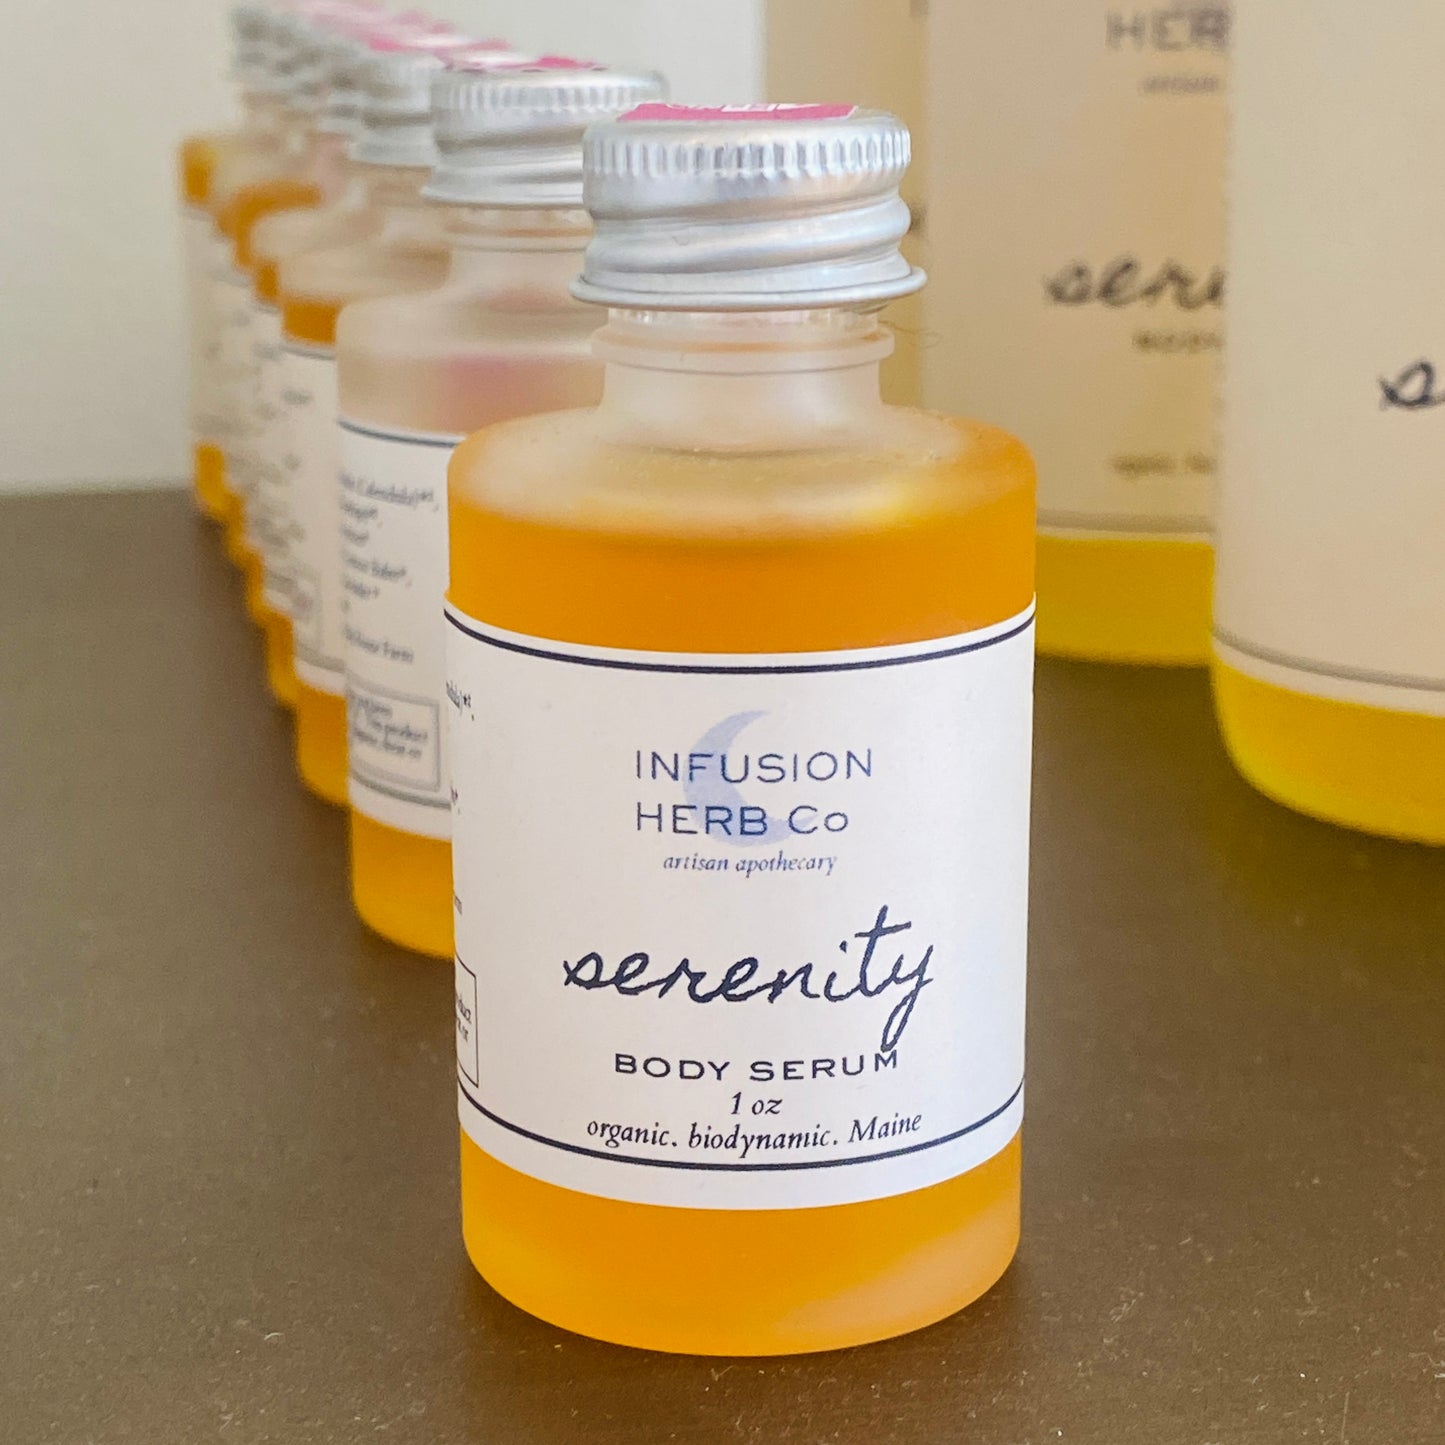 Infusion Herb Co. - Serenity Body Serum